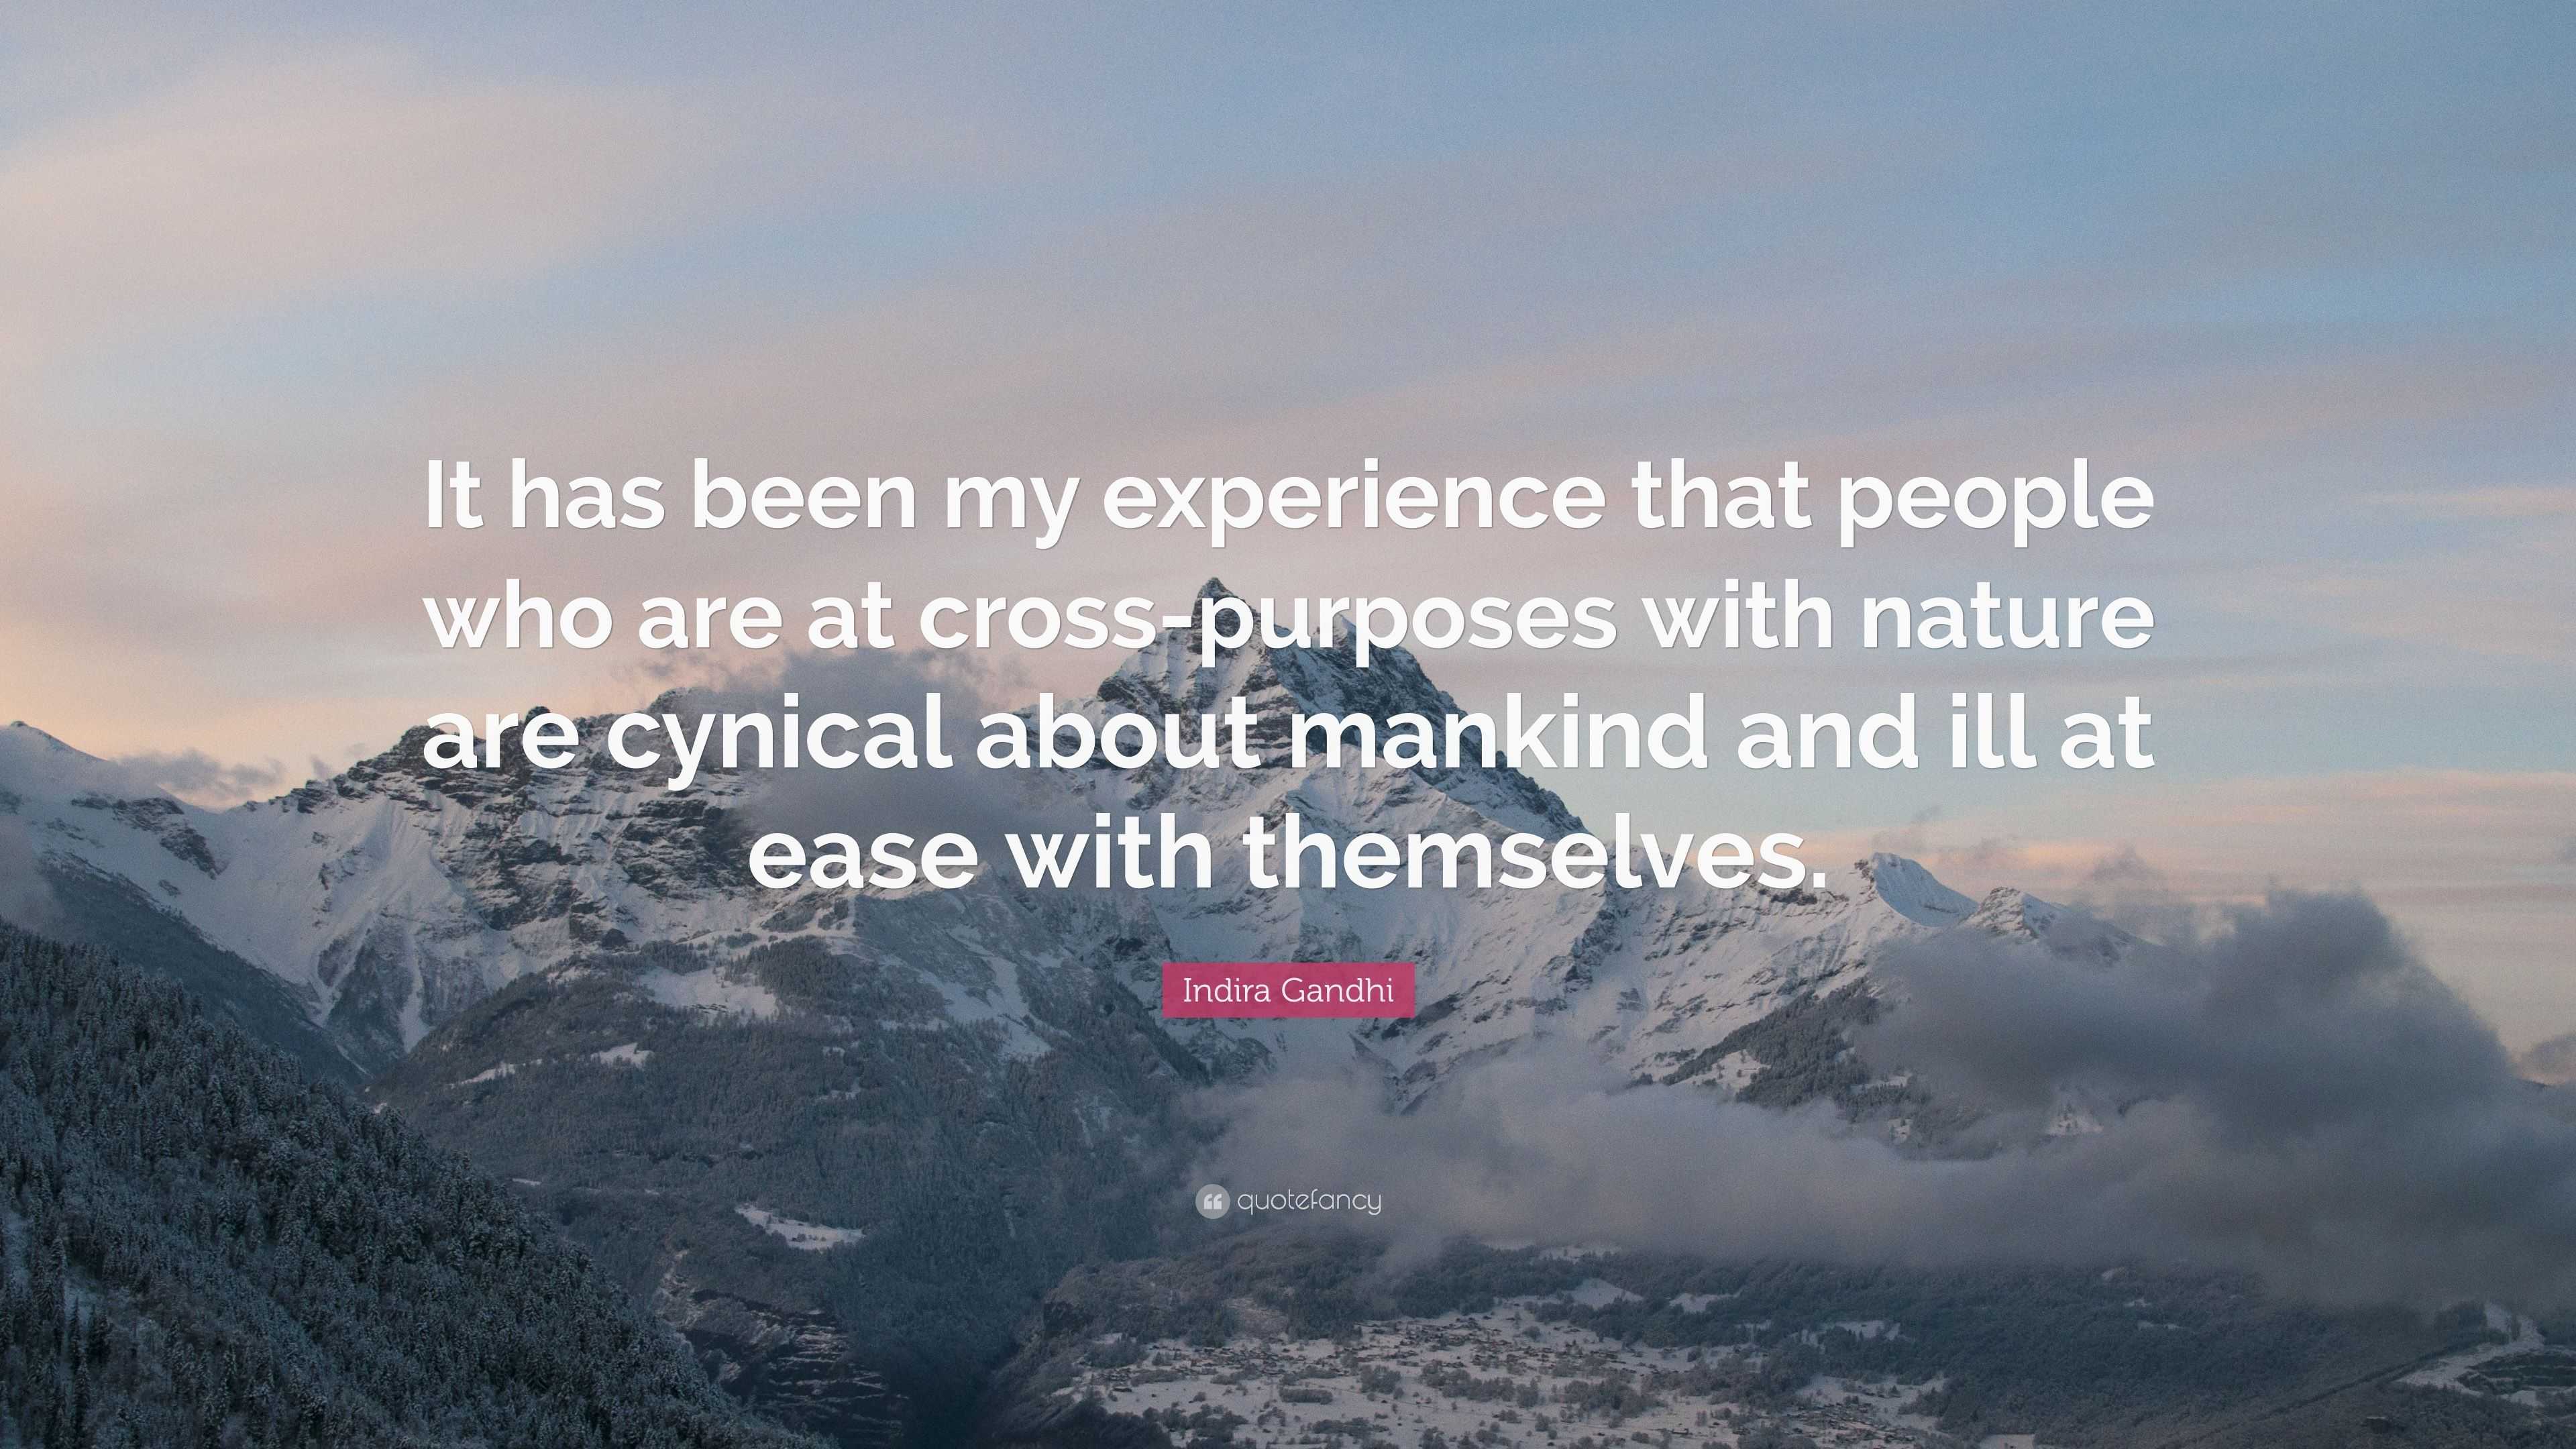 Indira Gandhi Quote: “It has been my experience that people who are at ...